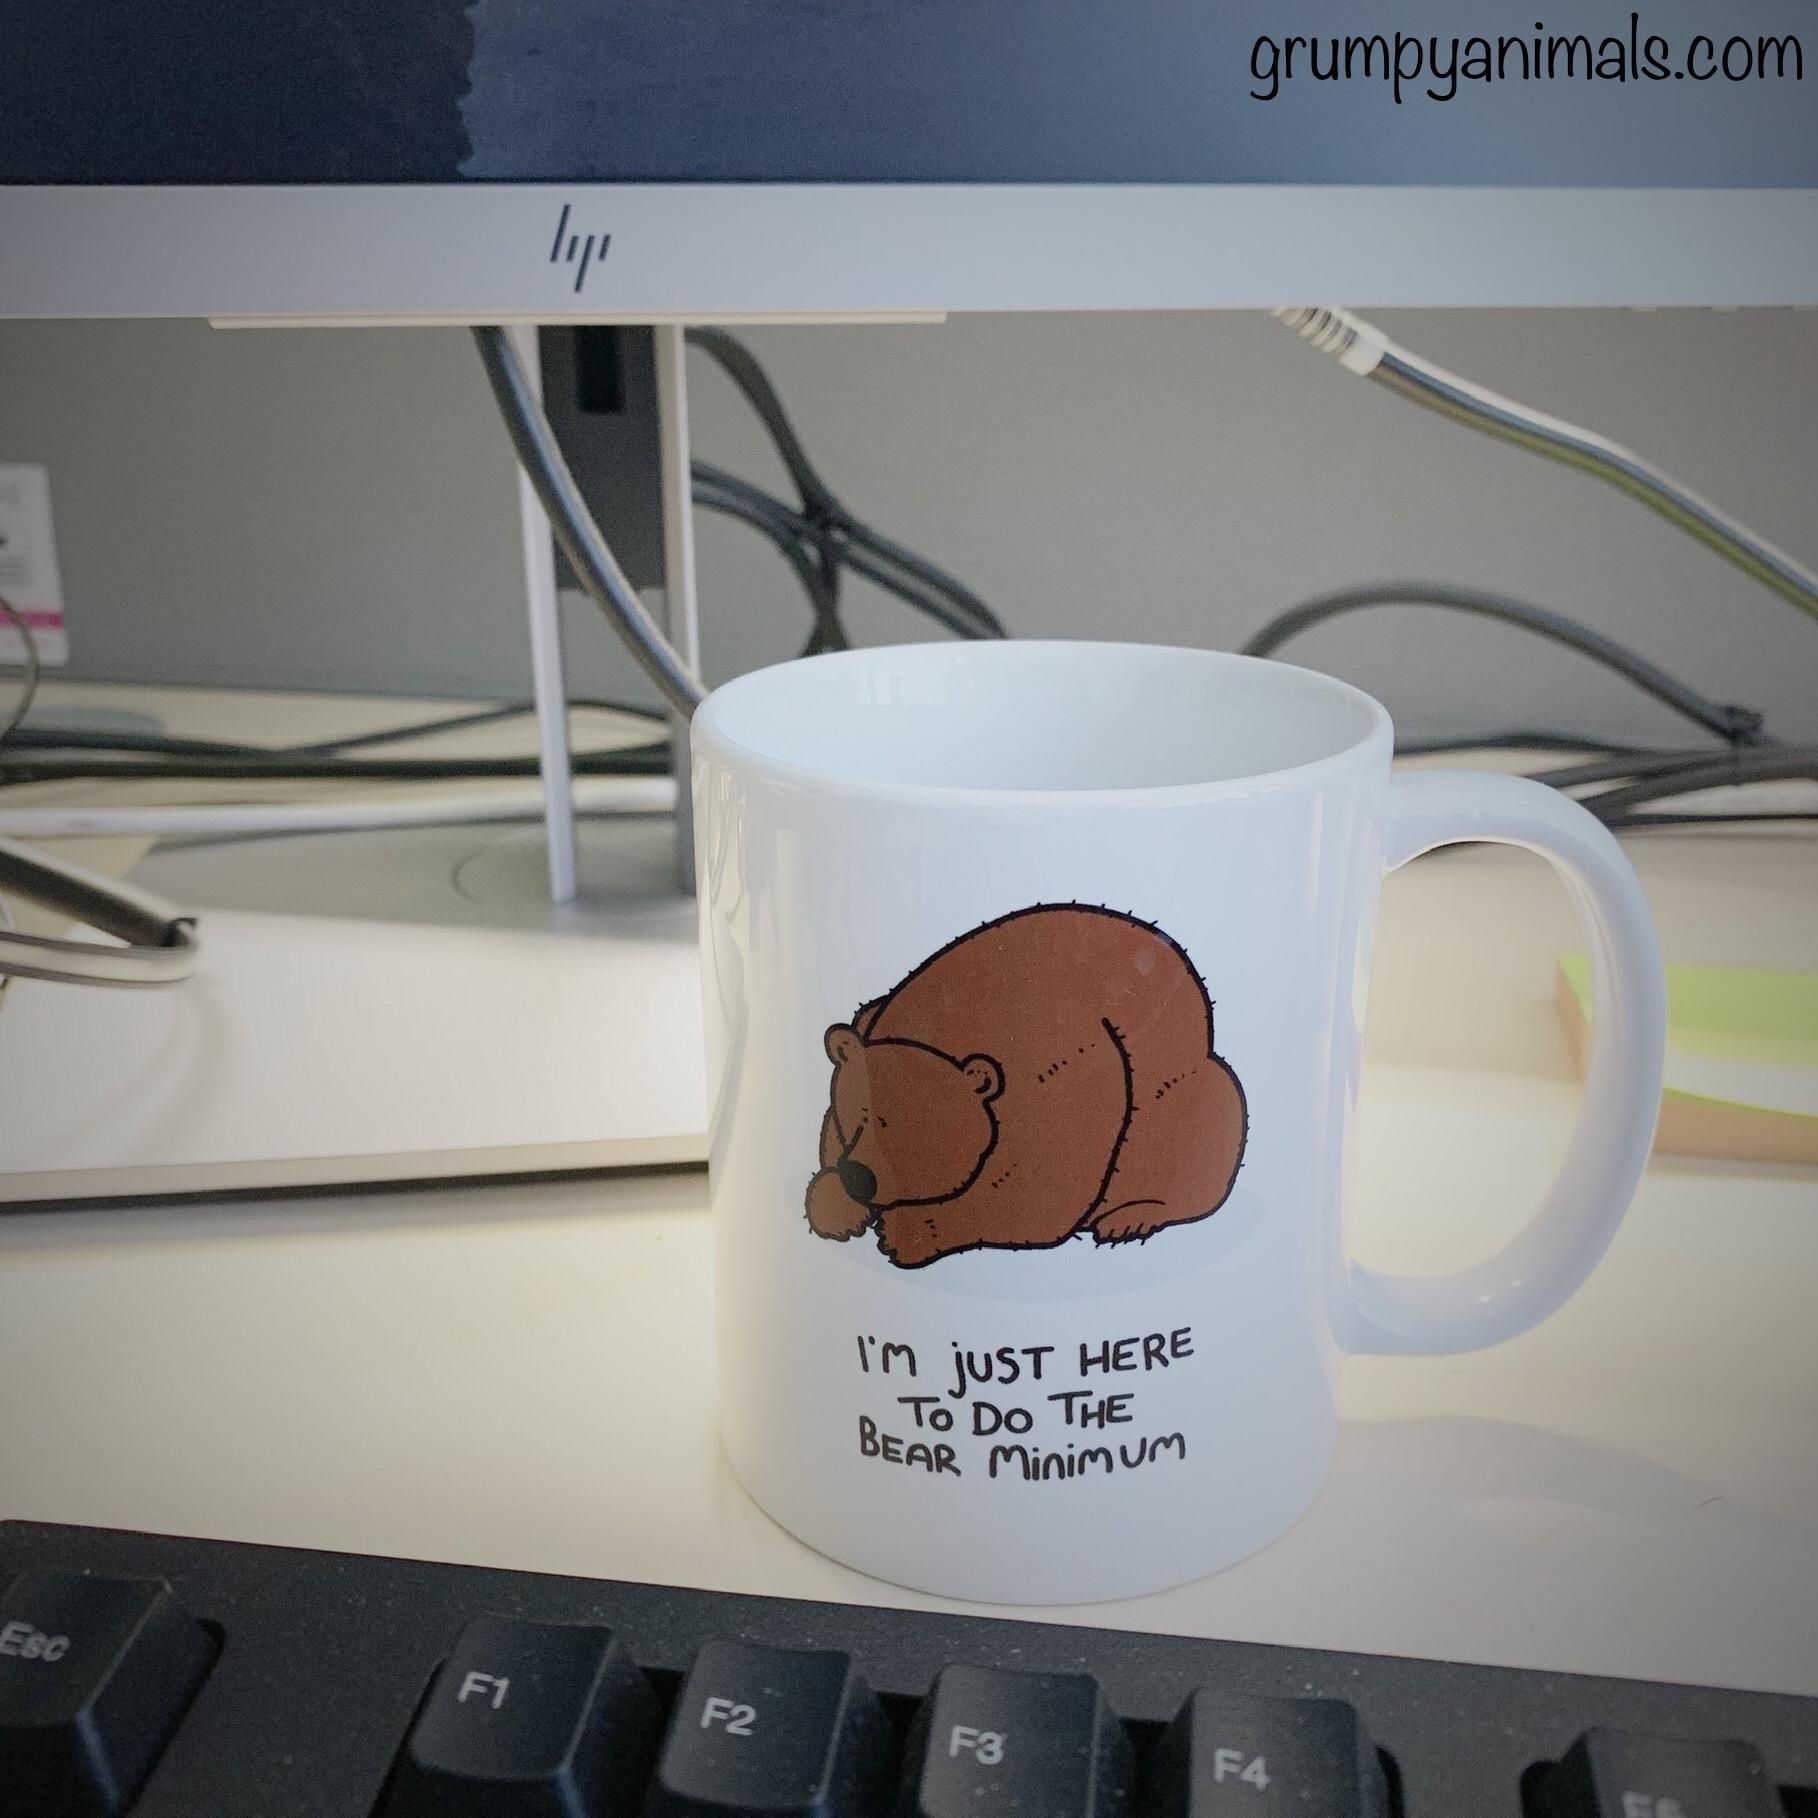 I designed a mug that perfectly matches my working from home productivity